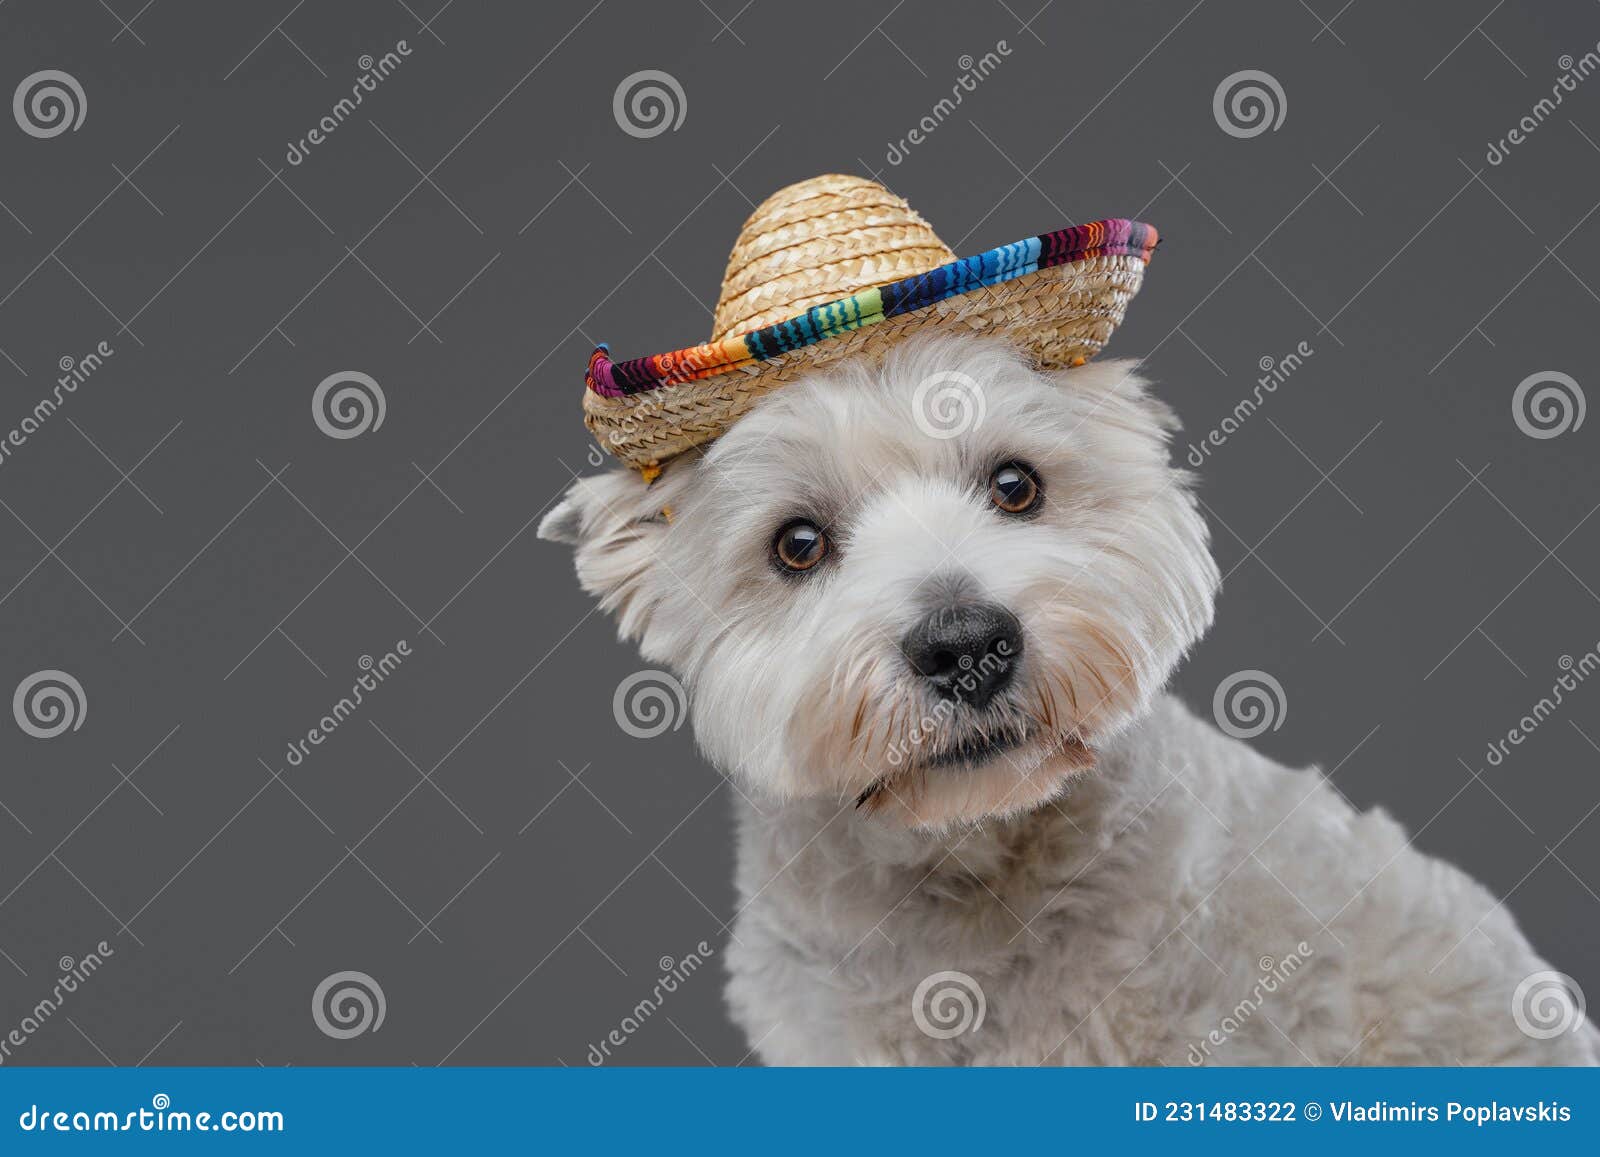 https://thumbs.dreamstime.com/z/shot-pedigreed-fluffy-west-highland-terrier-dog-colorful-straw-hat-amusing-white-terrier-puppy-mexican-straw-hat-231483322.jpg